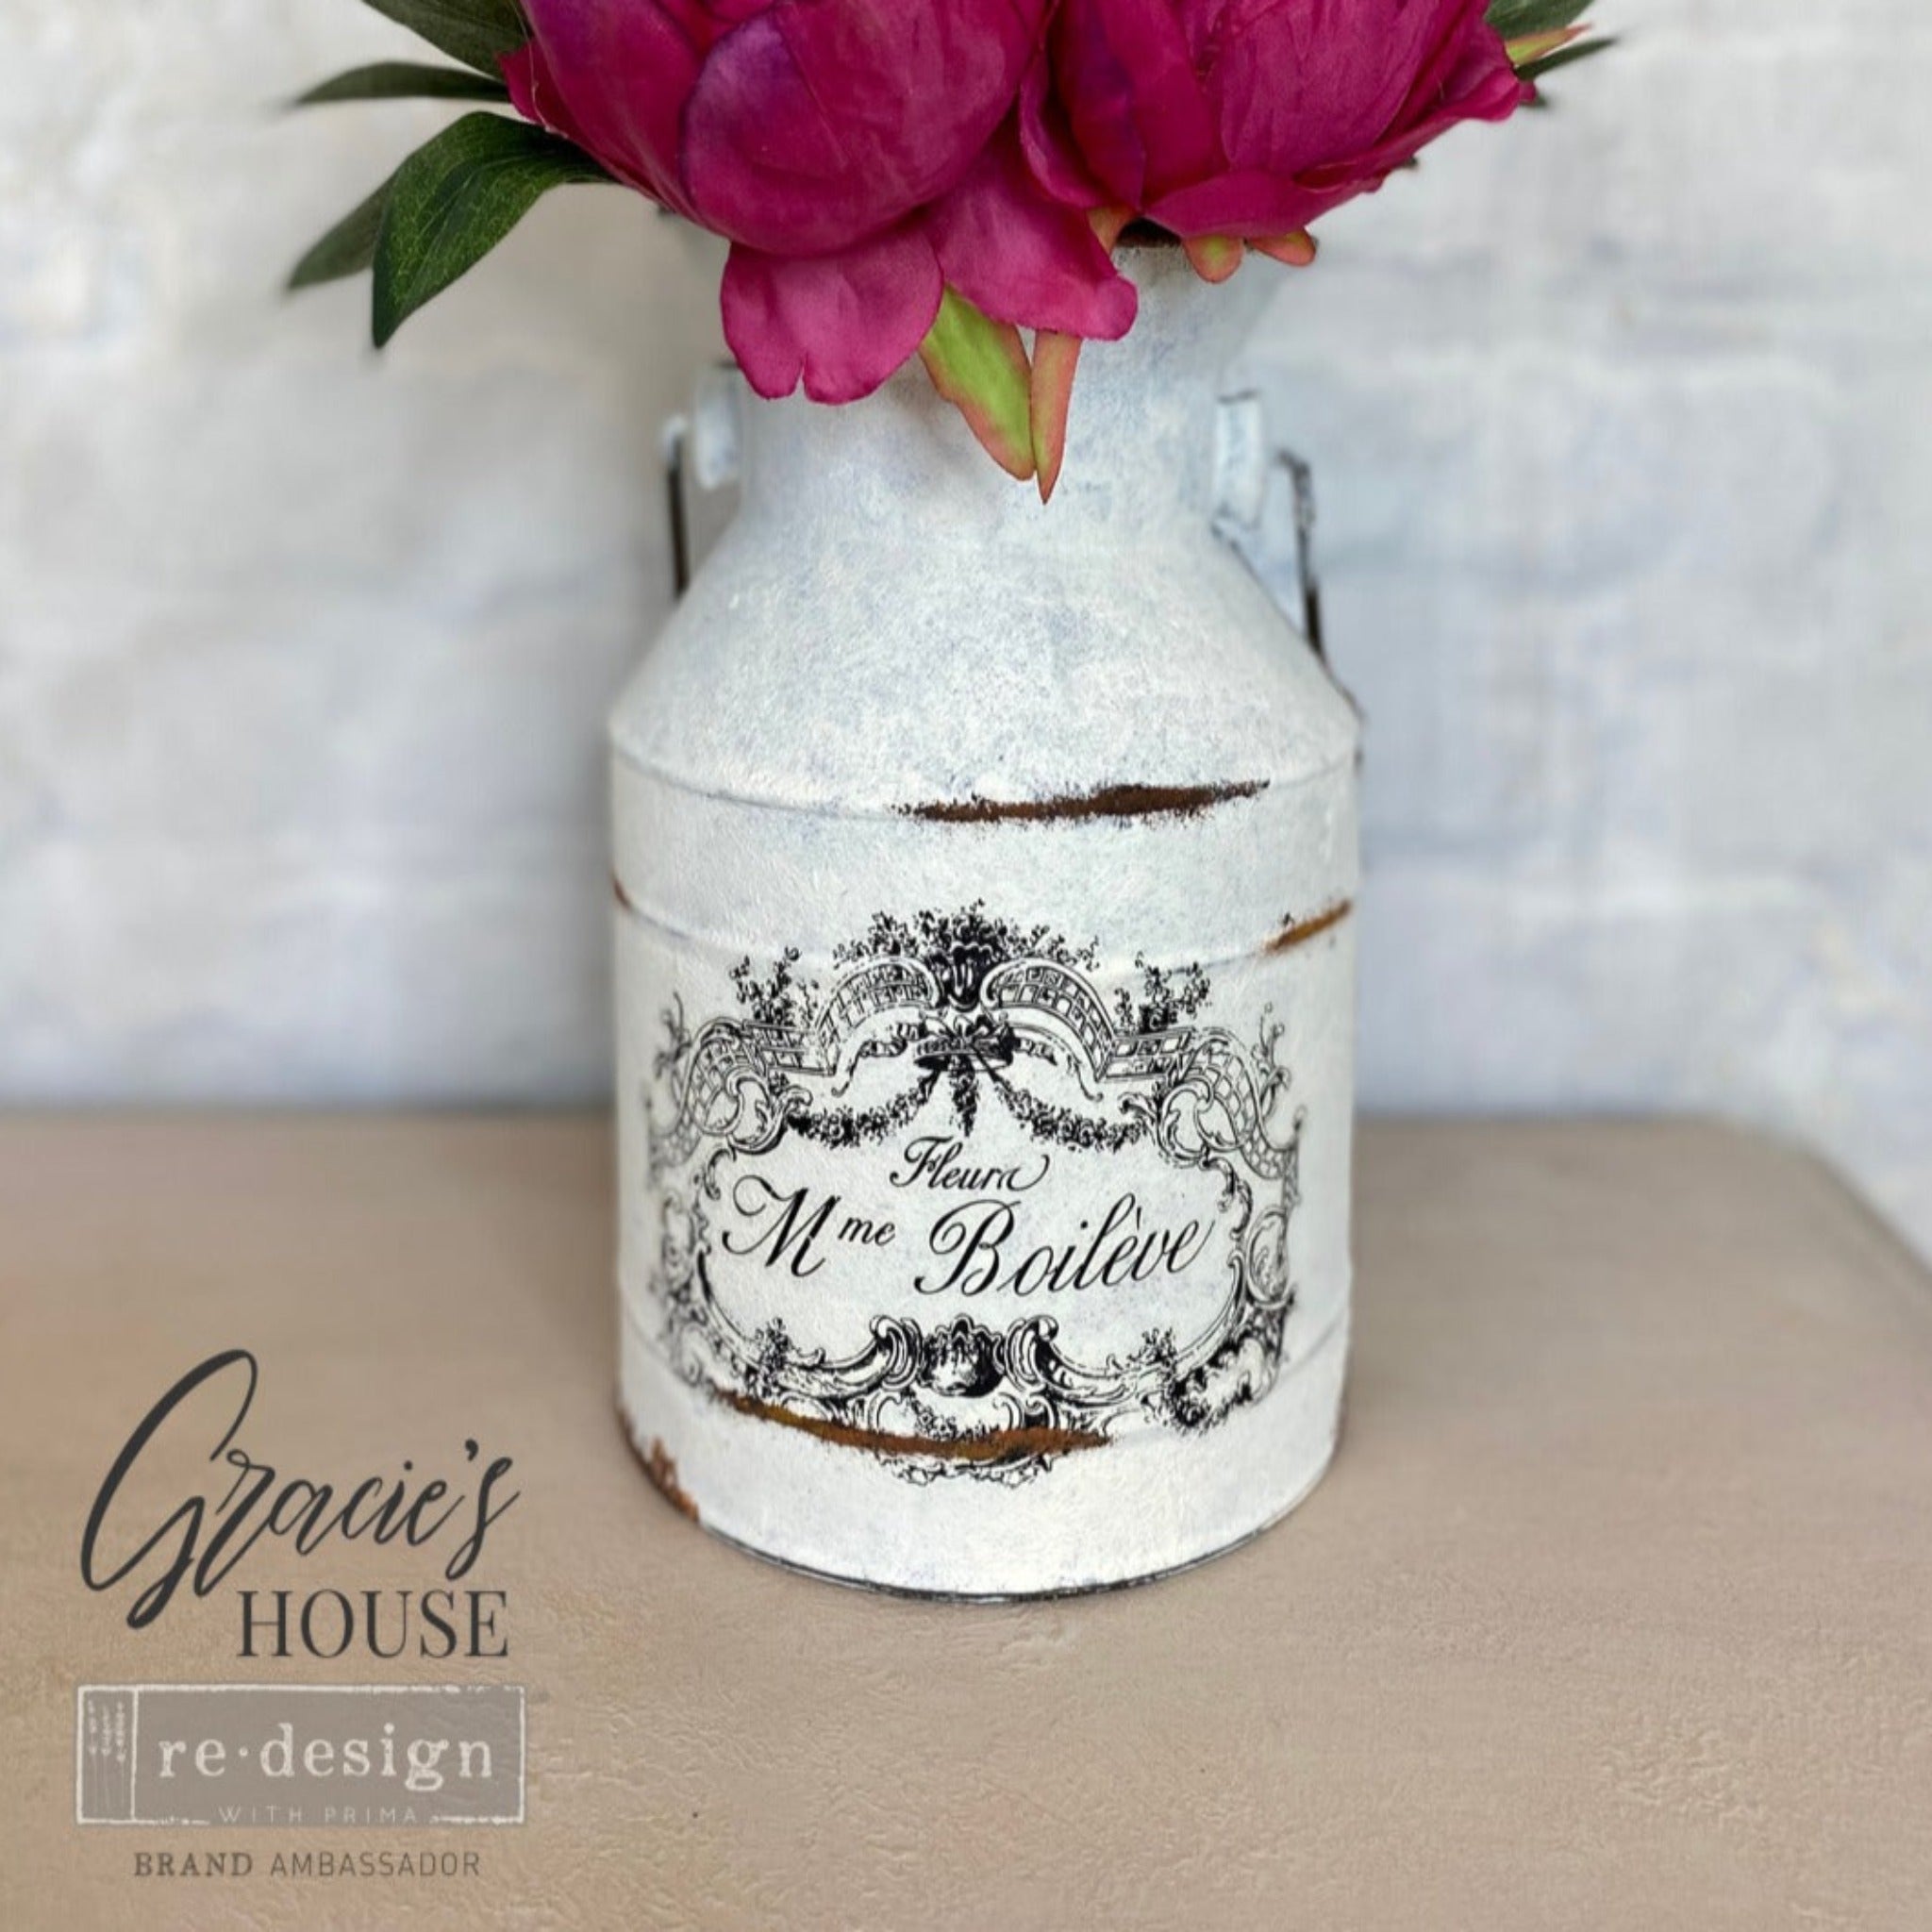 A small vintage jug refurbished by Gracie's House is painted a weathered white and features ReDesign with Prima's Classic Vintage Labels transfer on it.